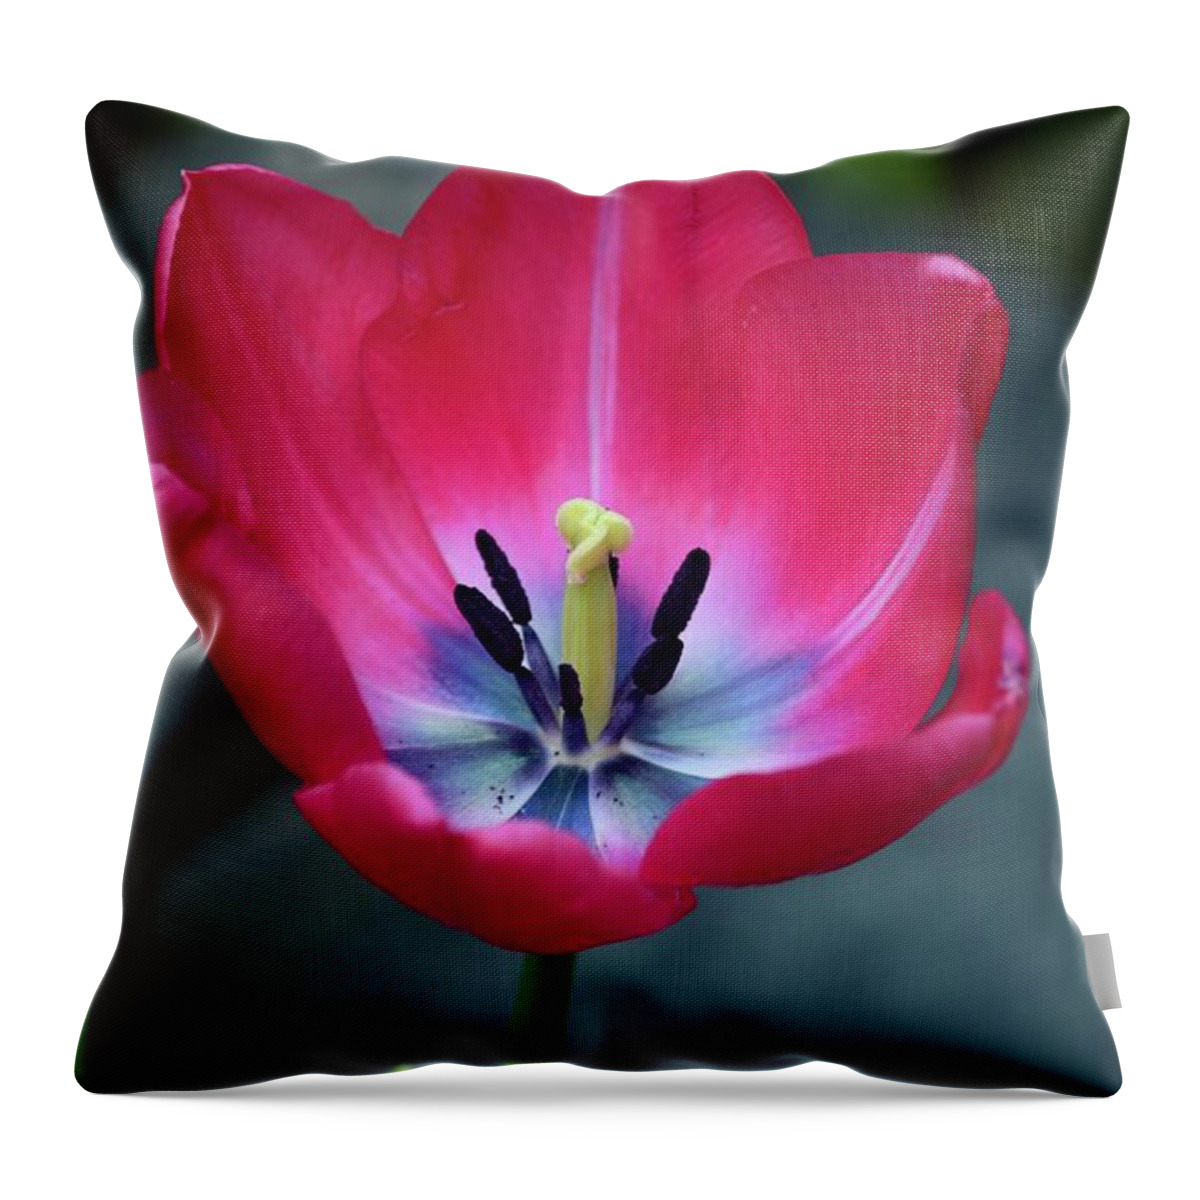 Tulip Throw Pillow featuring the photograph Red tulip blossom with stamen and petals and pistil by Imran Ahmed